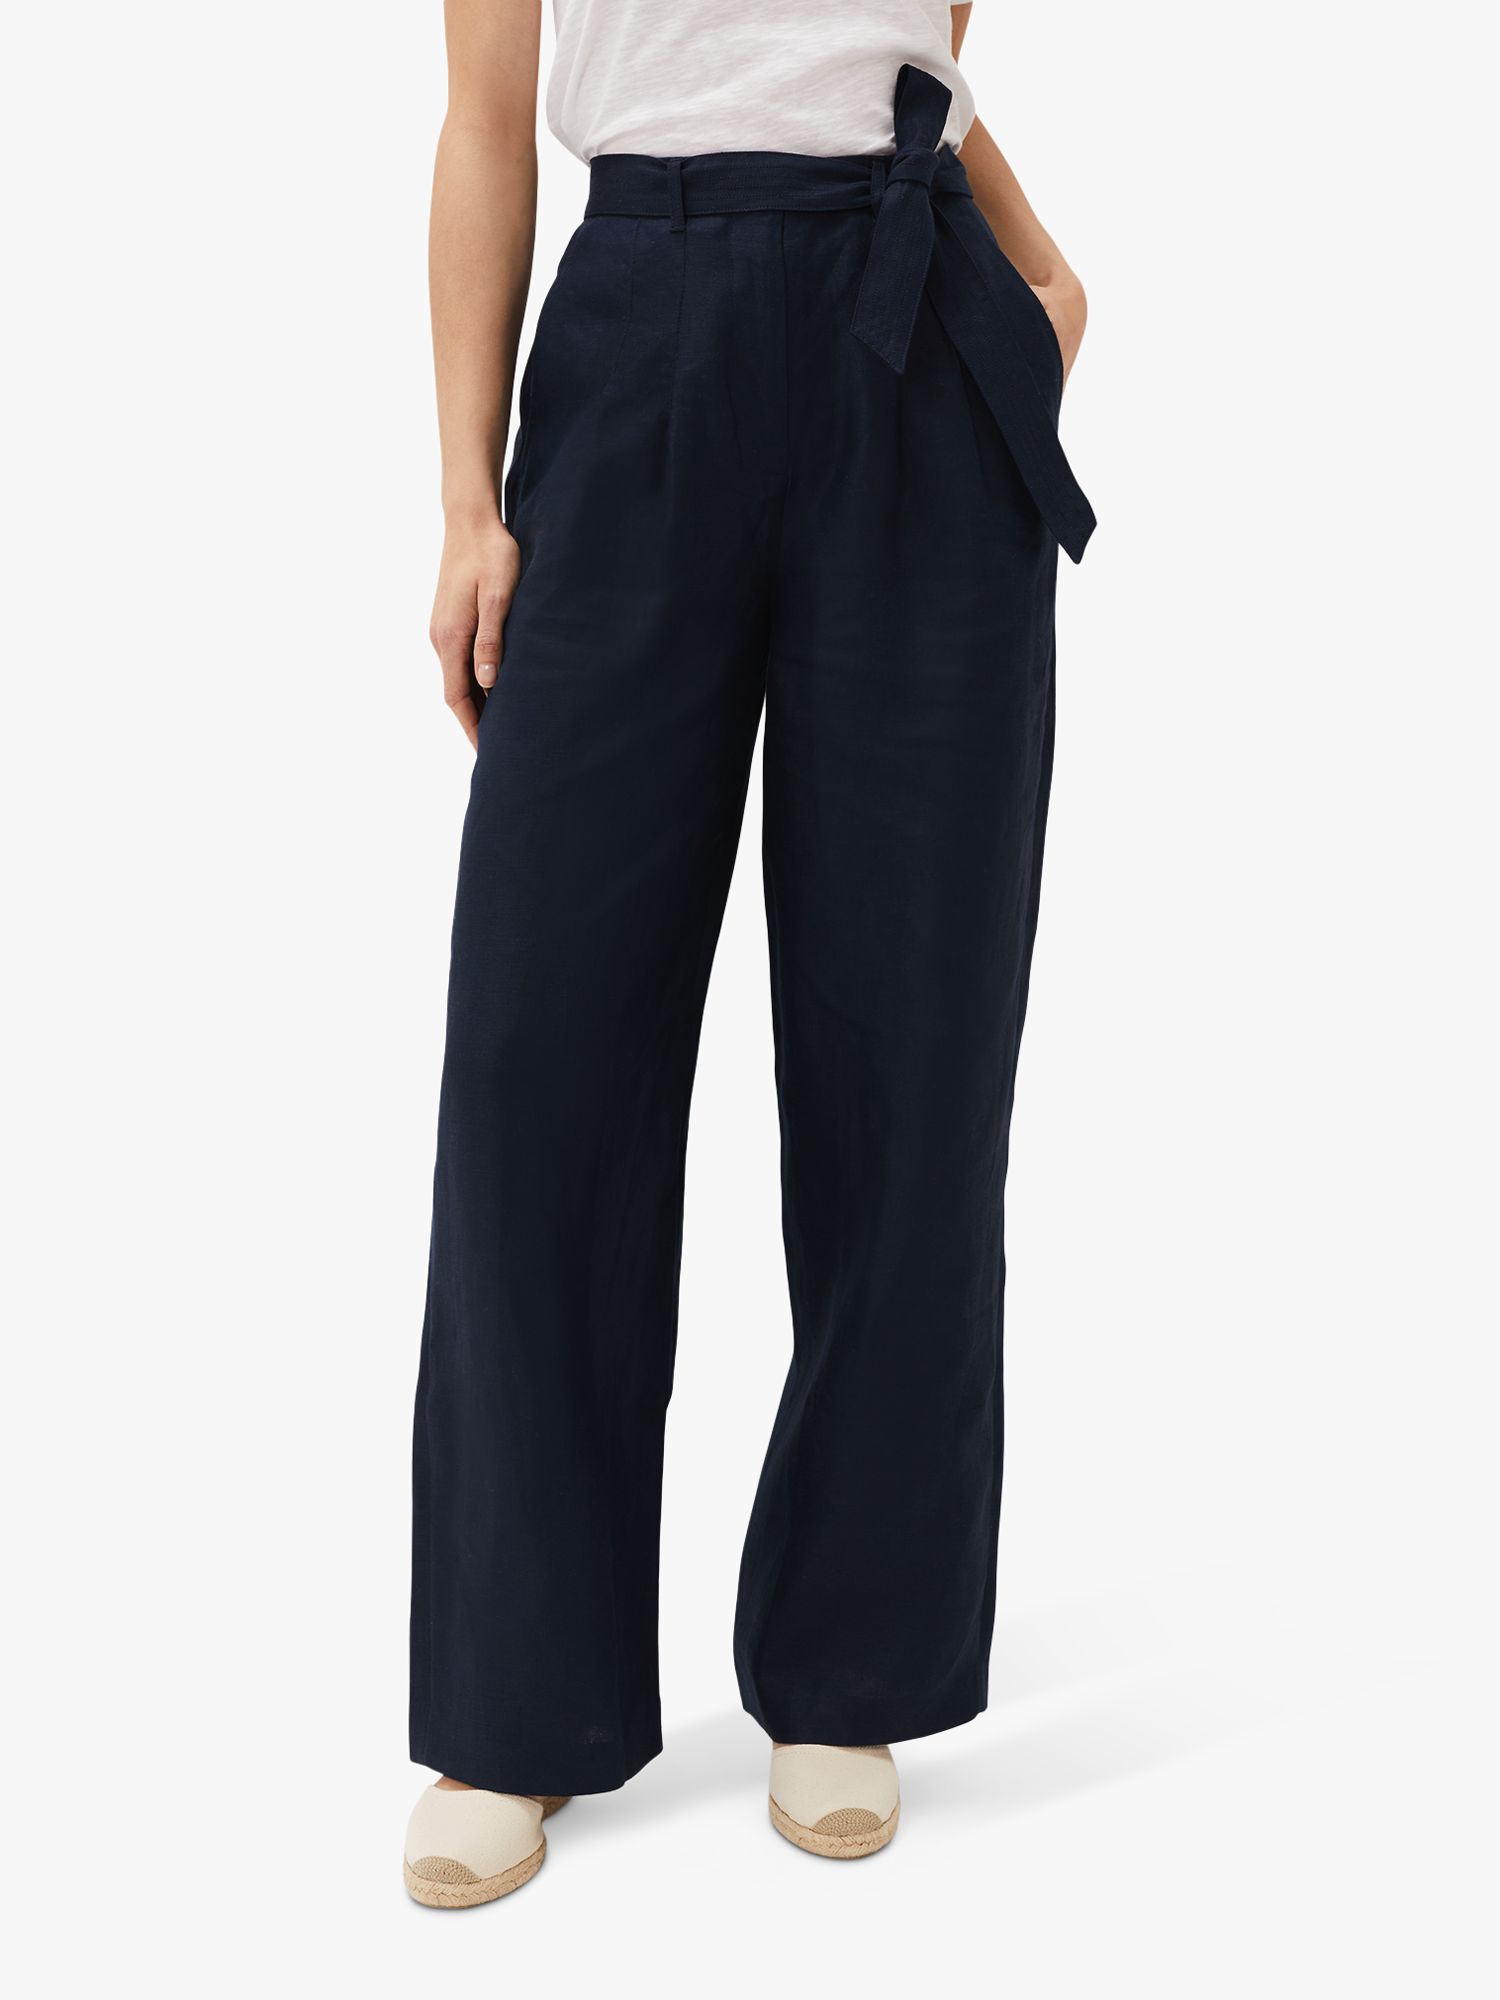 Phase Eight Aaliyah Linen Belted Trousers, Navy, 8